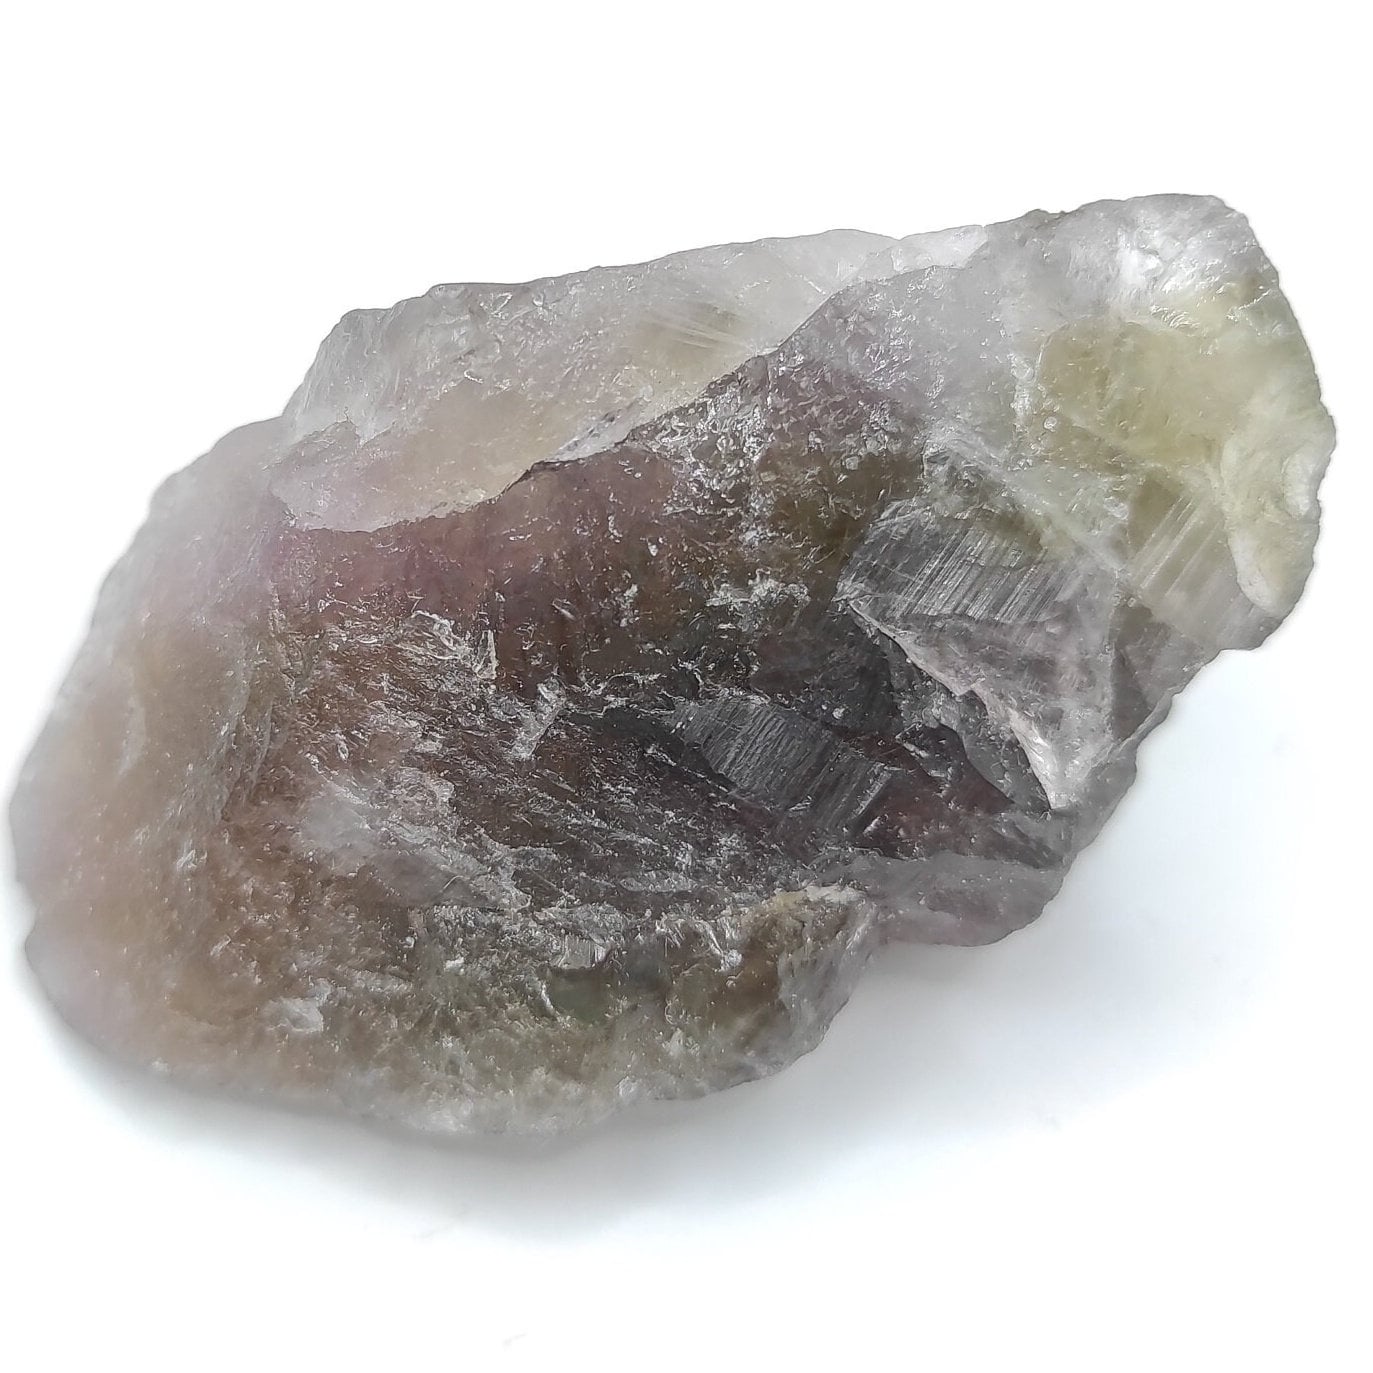 39g Genuine Auralite 23 with Natural Green Amethyst - Rare Unheated Green Amethyst - Thunder Bay Amethyst - Ethical Crystals from Canada